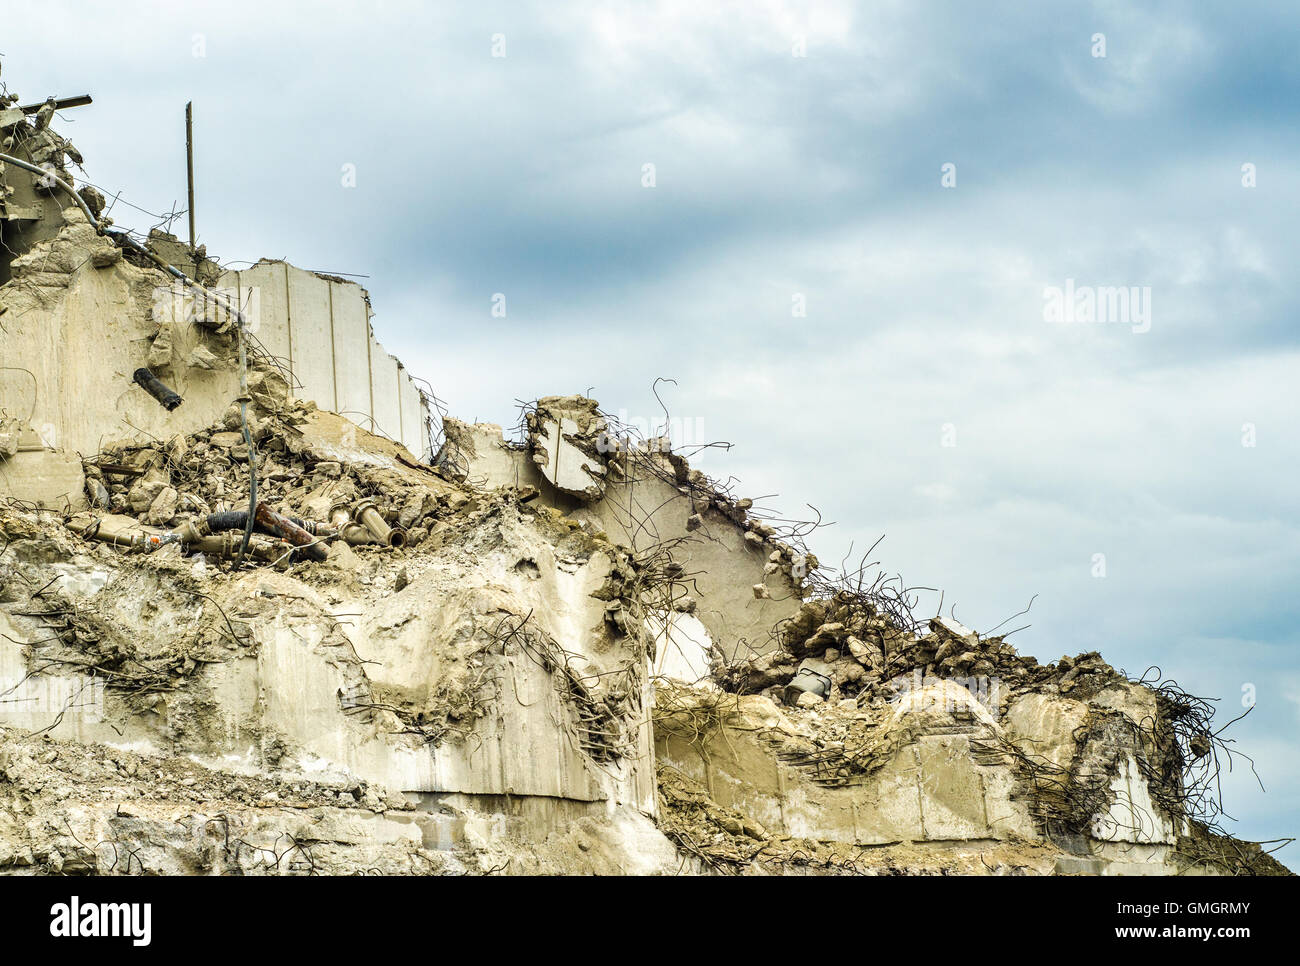 Demolished Or Collapsed Apartment Building Wall With Copy Space Stock Photo